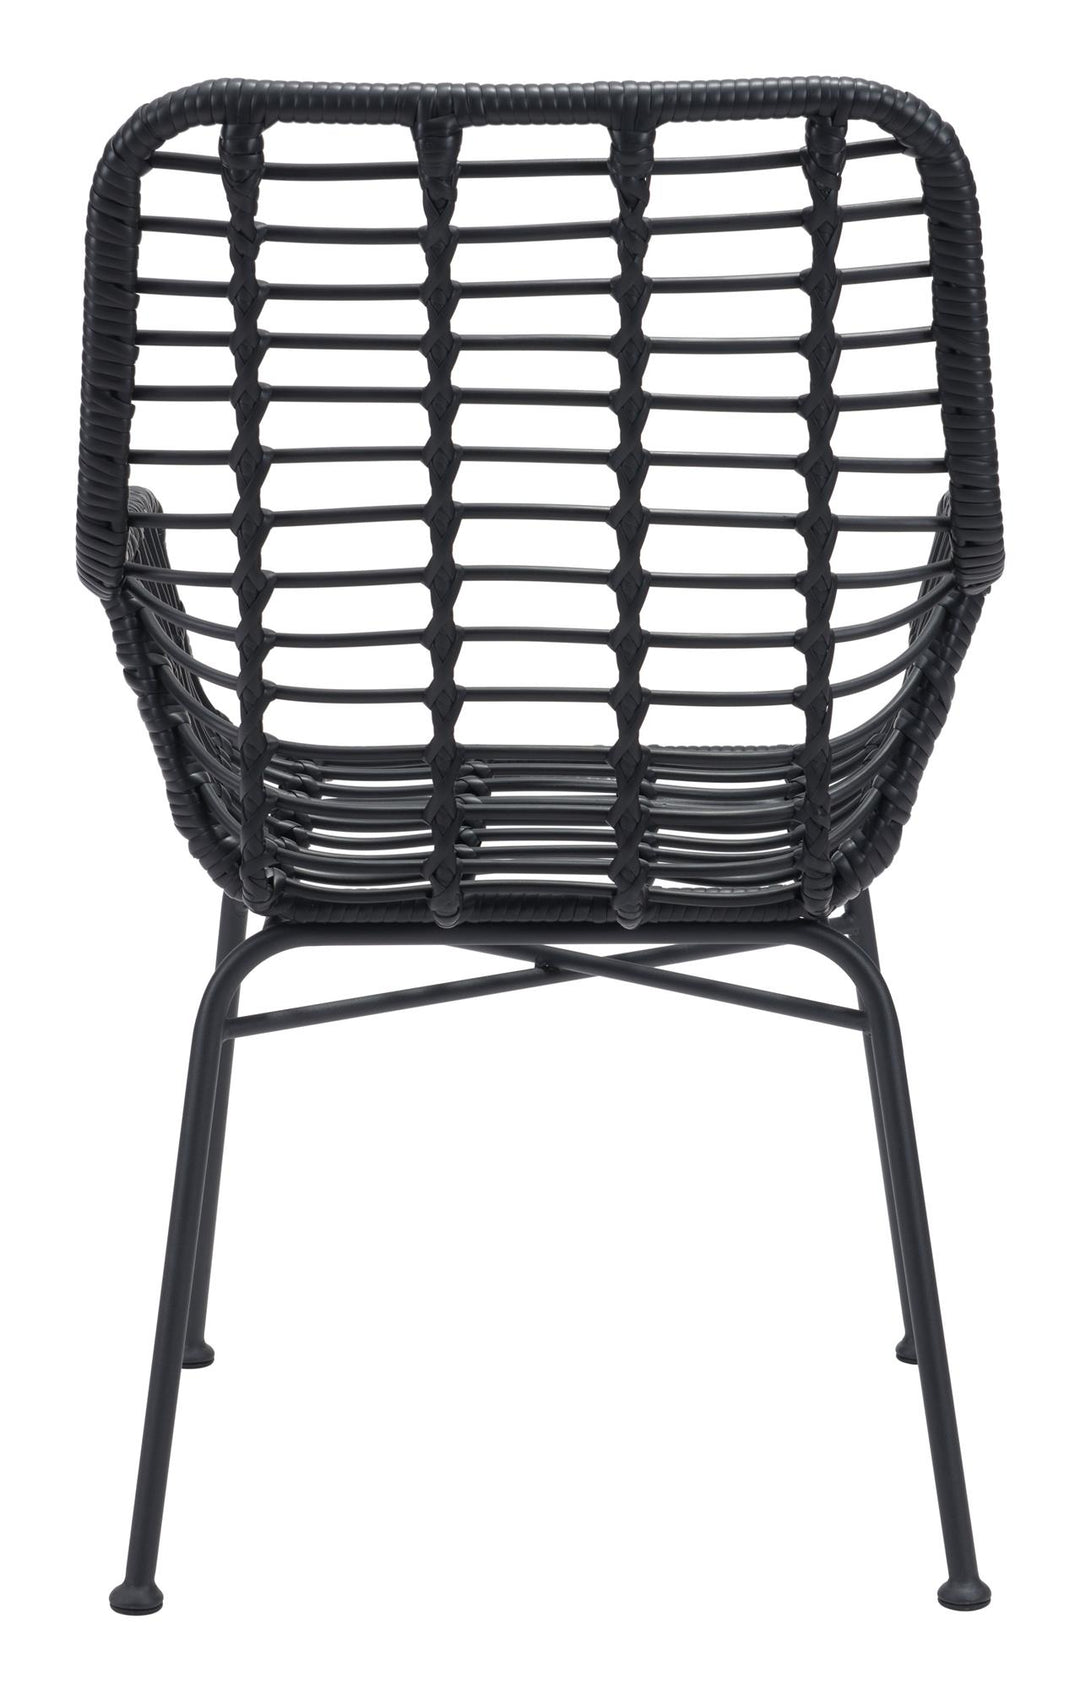 Set of 2 Patio dining chair - Black